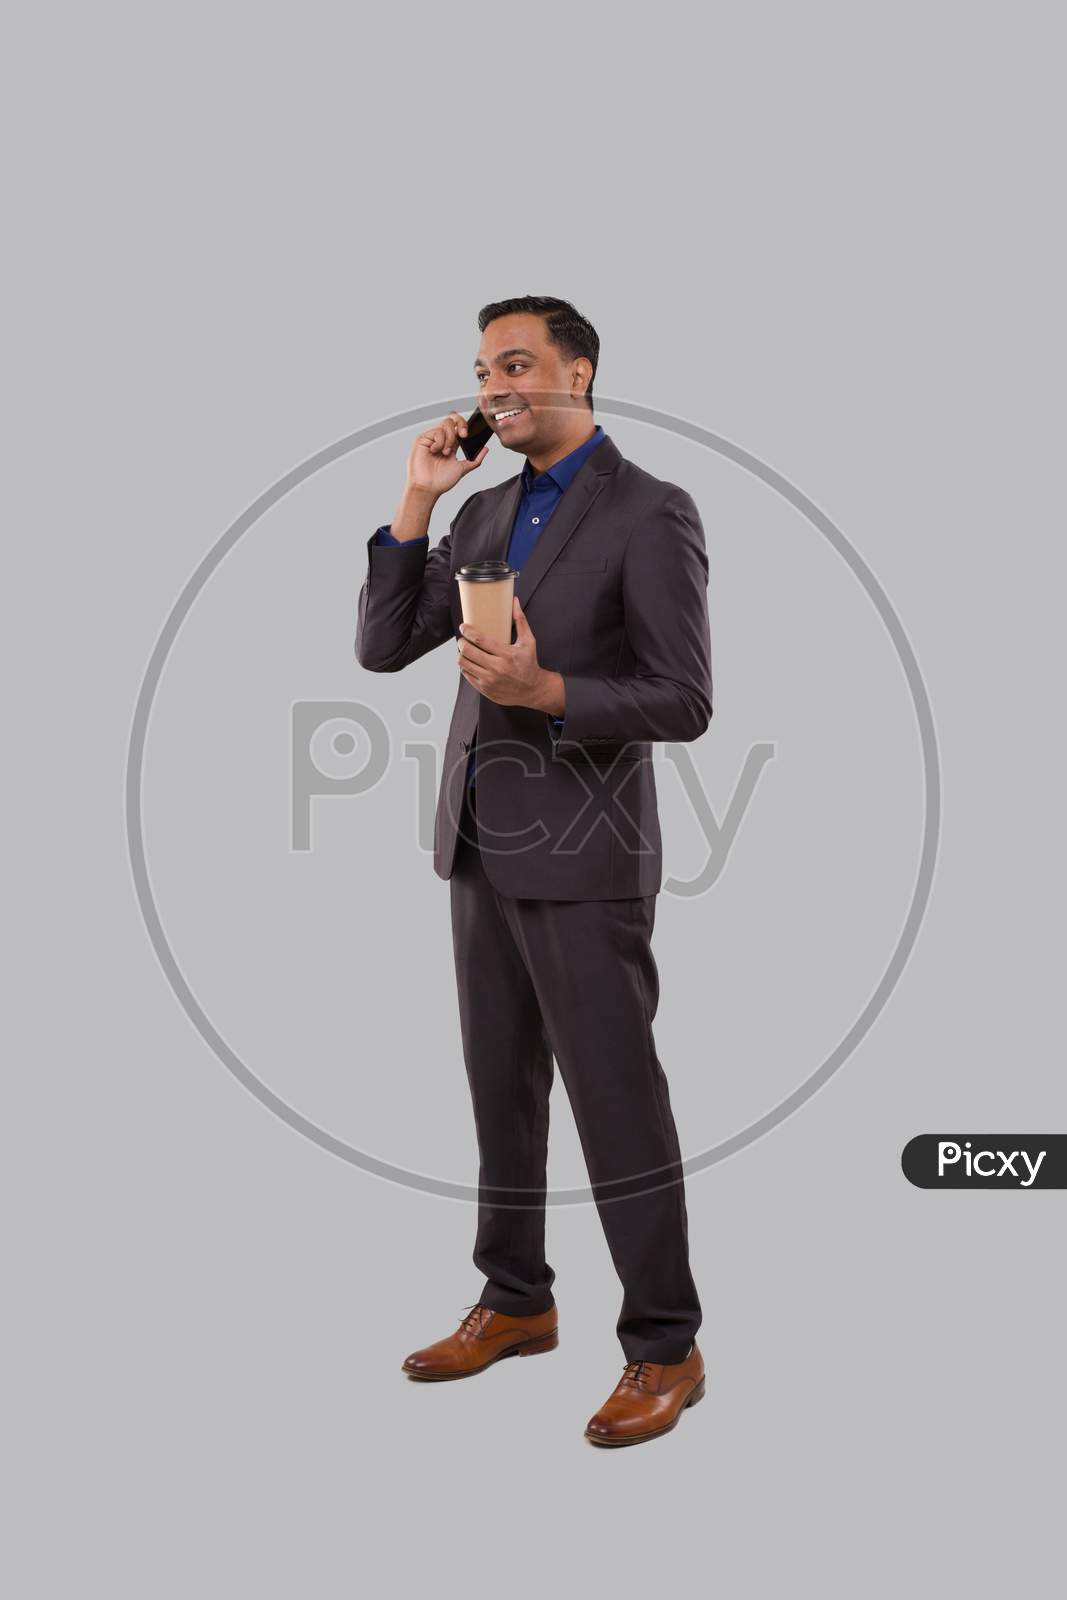 Businessman Talking On Phone With Coffee To Go Cup Isolated. Indian Business Man With Coffee Take Away Cup Standing Full Length